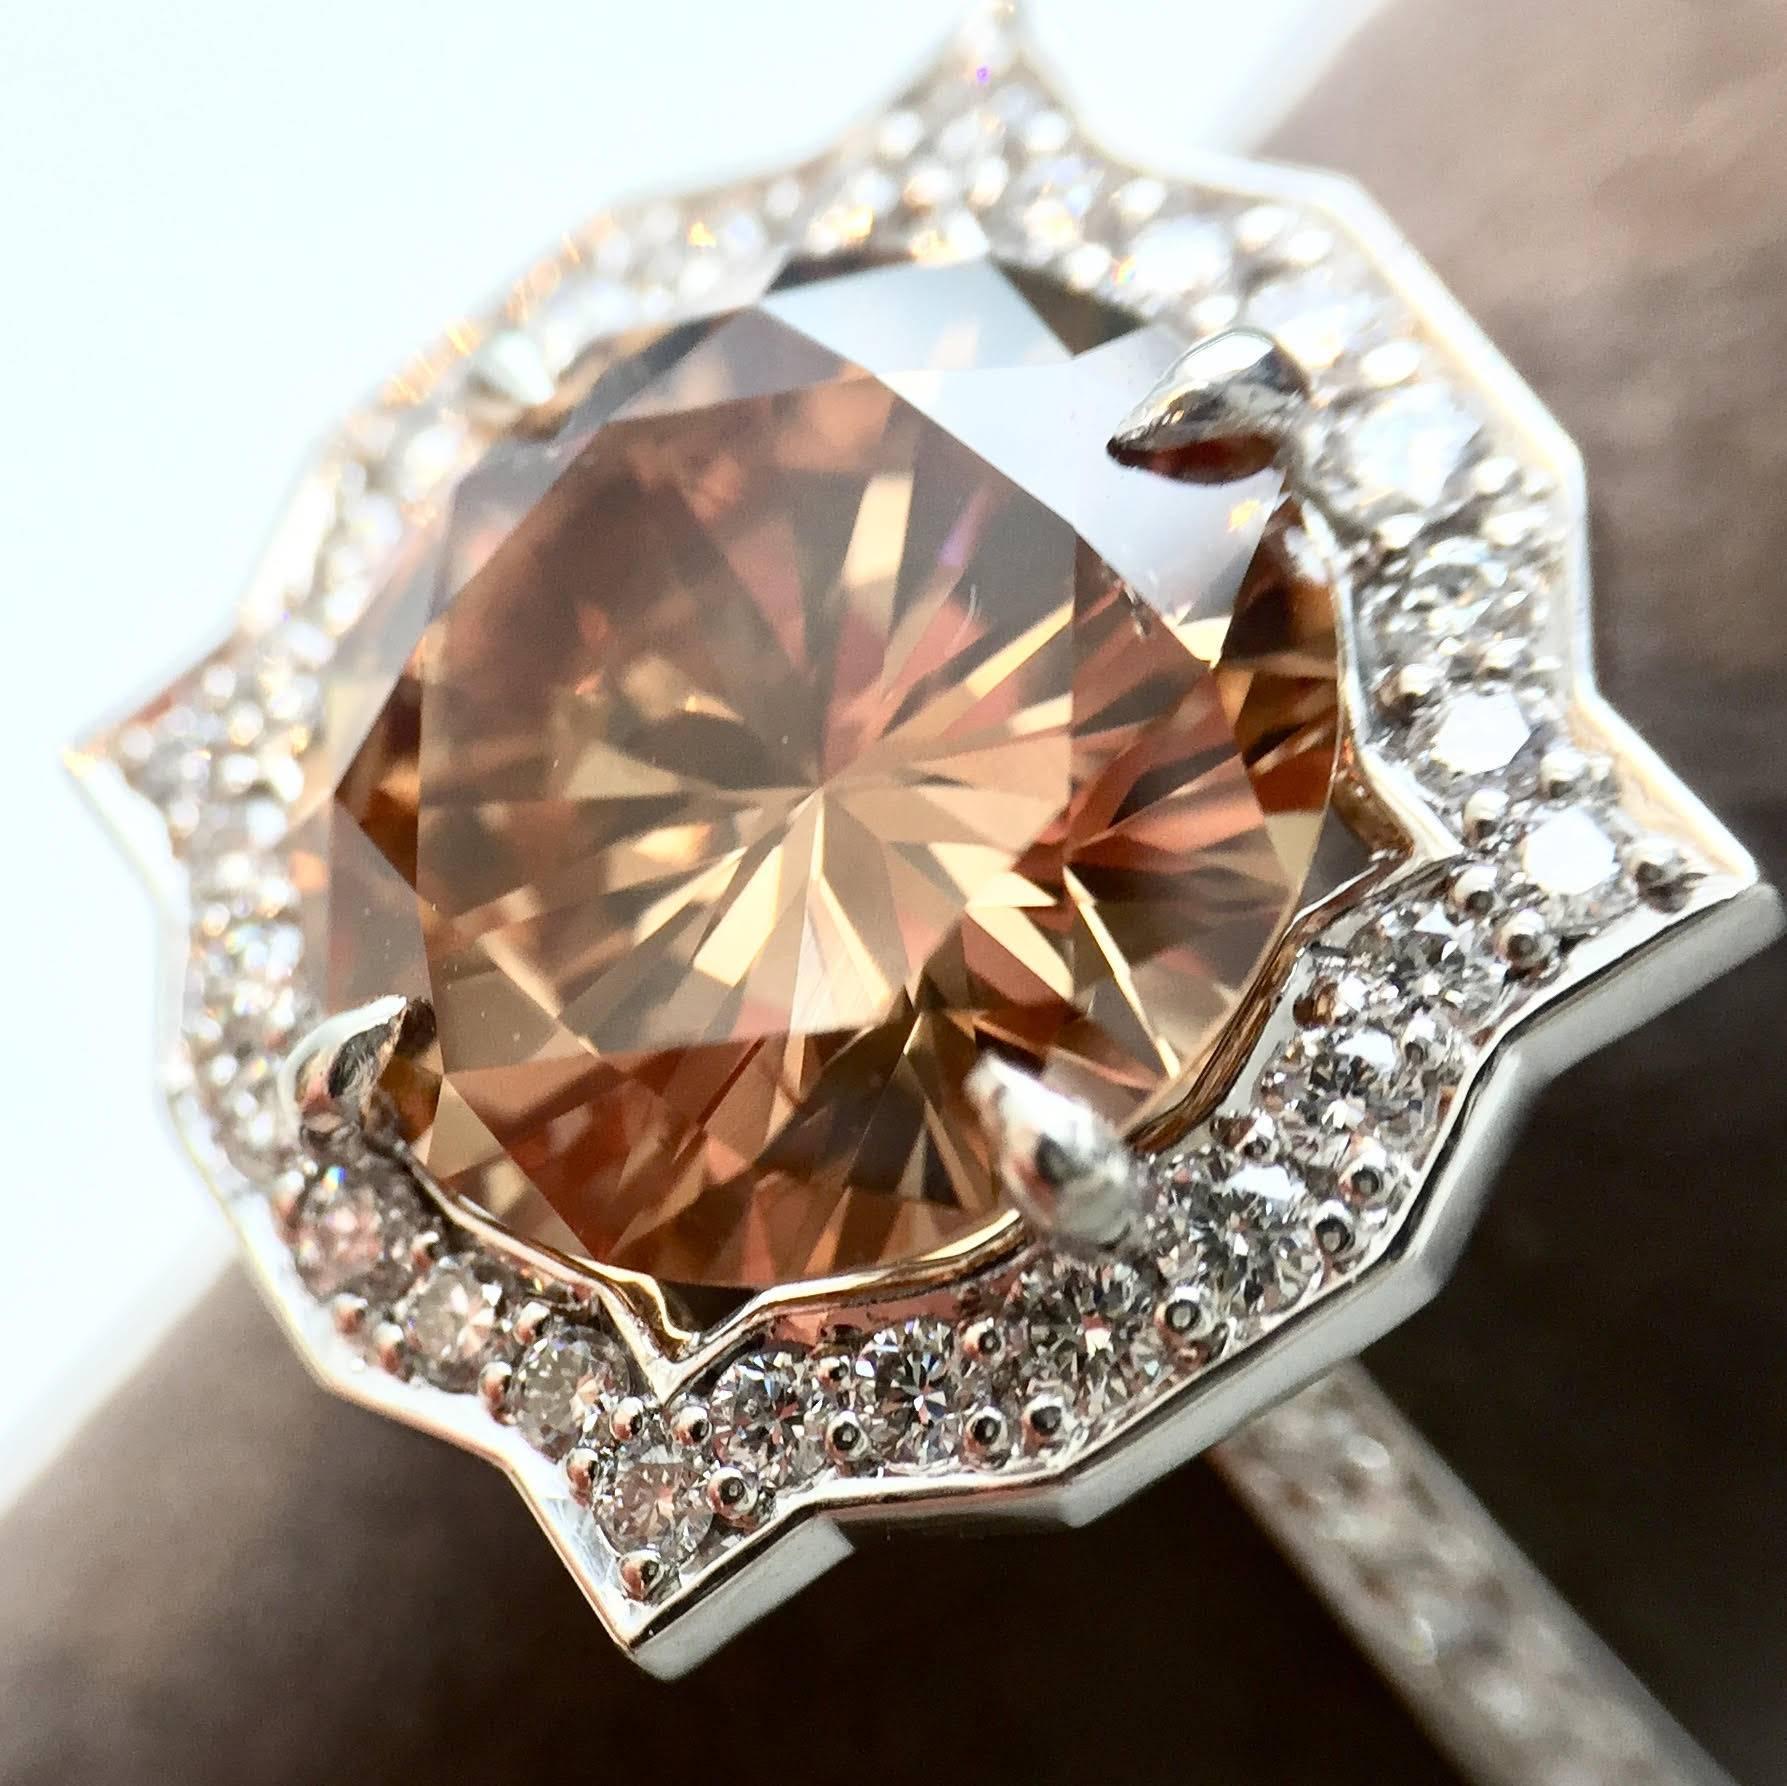 Vivid and lively E.G.L. USA certified 4.15 carat genuine fancy orangy brown diamond set in a stylish Art Deco inspired platinum halo mounting. This round brilliant untreated fancy orangy brown diamond reflects a range of beautiful colors. See image